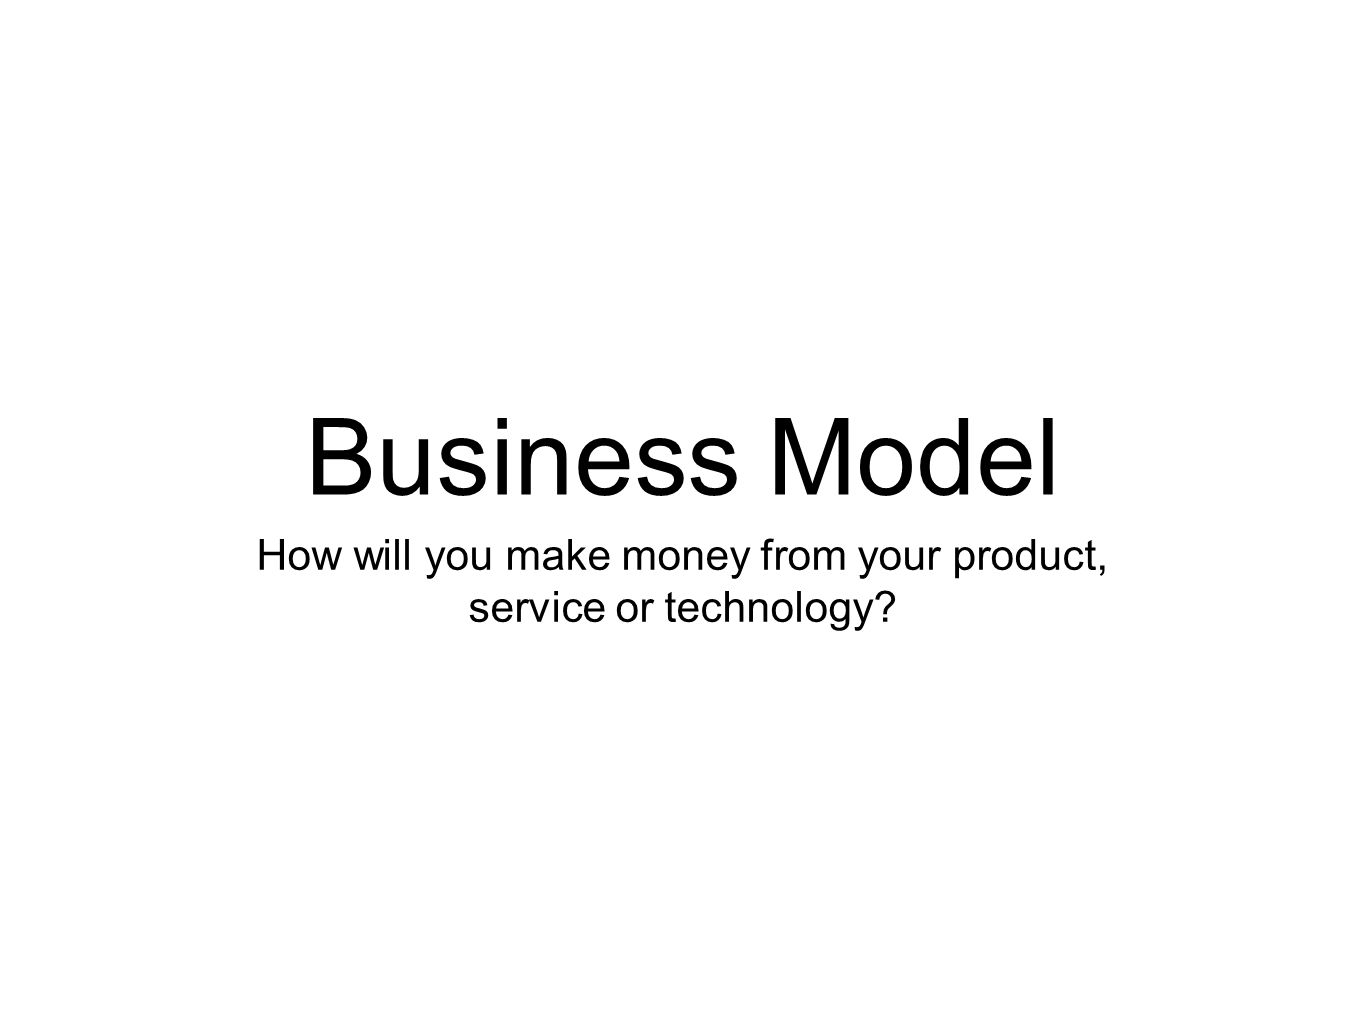 Business Model How will you make money from your product, service or technology